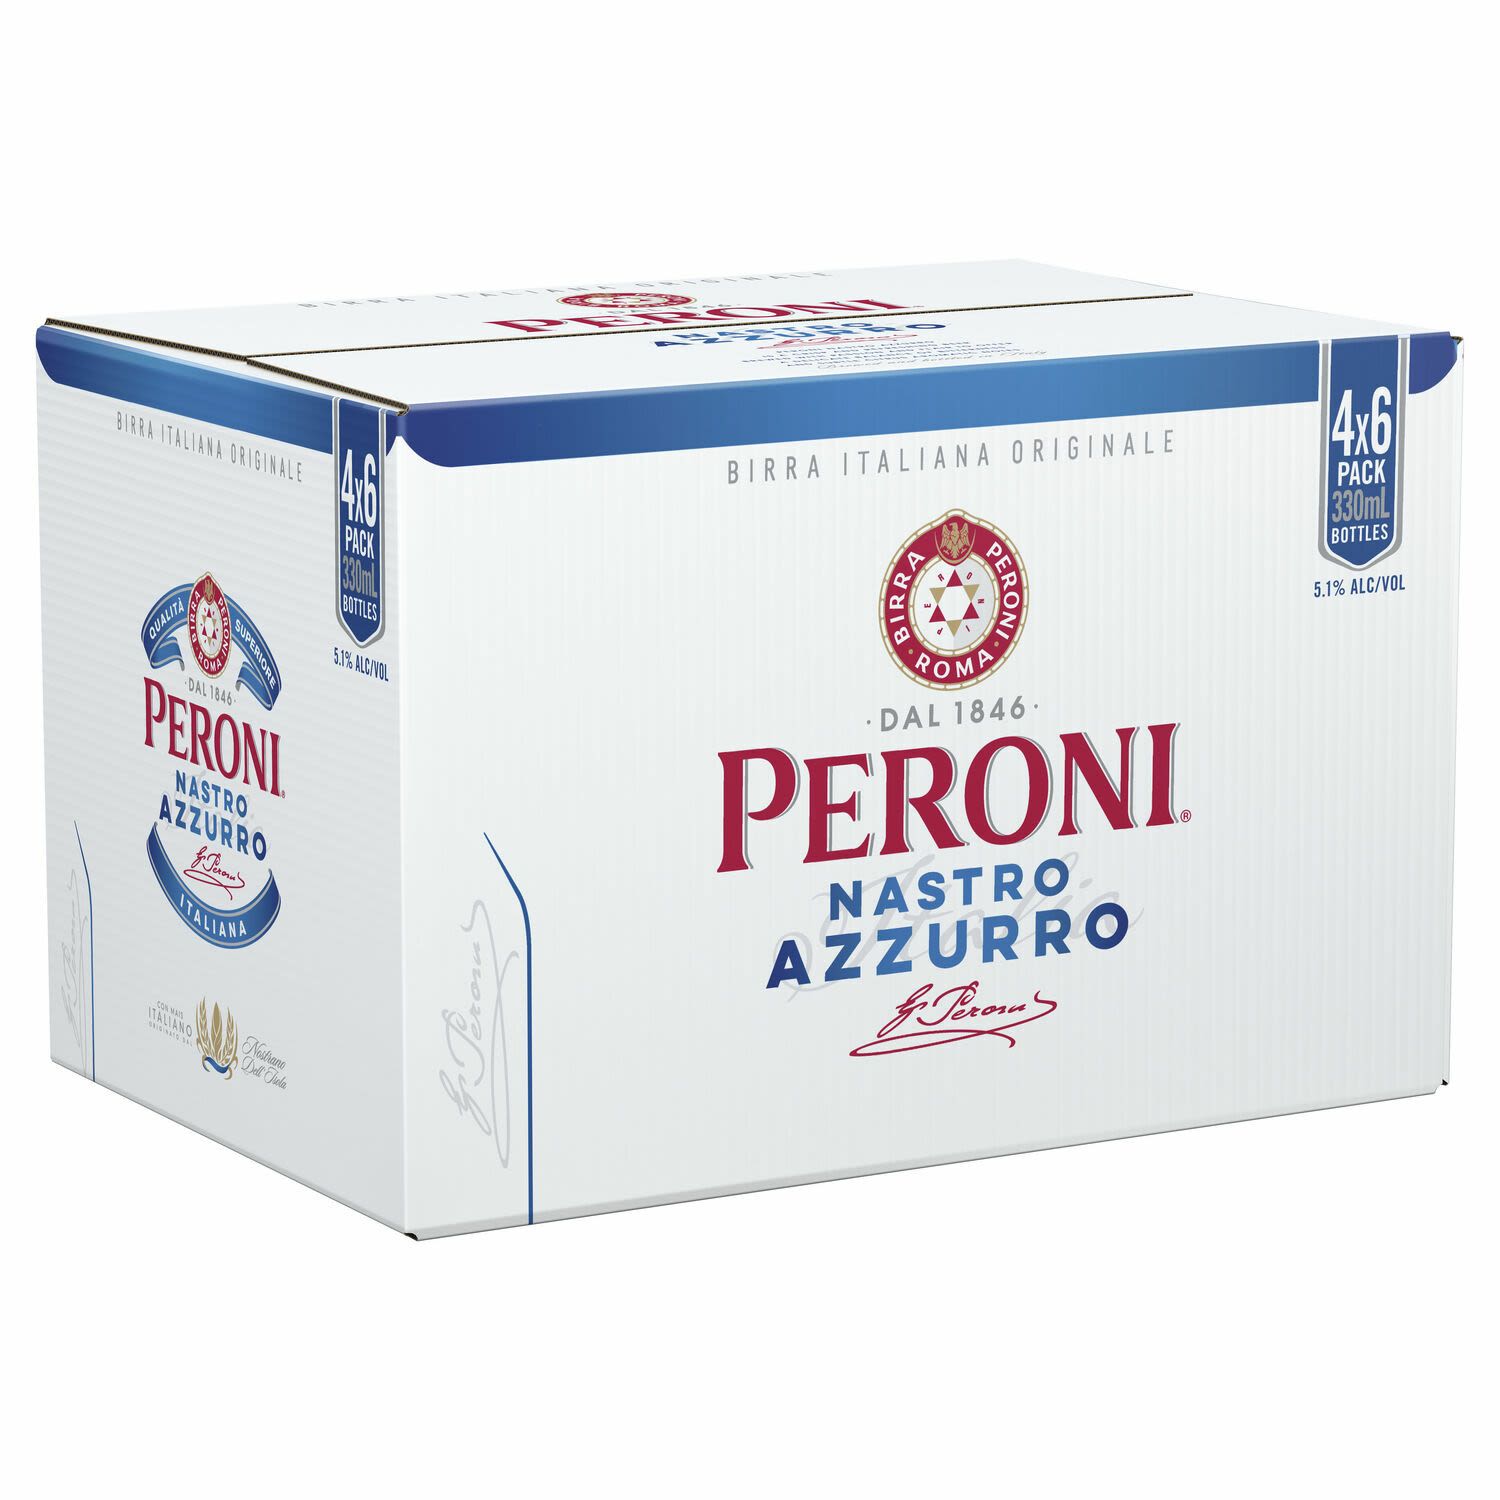 Peroni Nastro Azzuro is brewed to the authentic Italian recipe originating in Lombardia, Italy in the 19th century. Brewed under licence to produce a fresh and crisp taste, Peroni Nastro Azzurro can now be found in all good cafés and bars and is the perfect lager to quench a serious thirst.<br /> <br />Alcohol Volume: 5.10%<br /><br />Pack Format: 24 Pack<br /><br />Standard Drinks: 1.3</br /><br />Pack Type: Bottle<br /><br />Country of Origin: Italy<br />